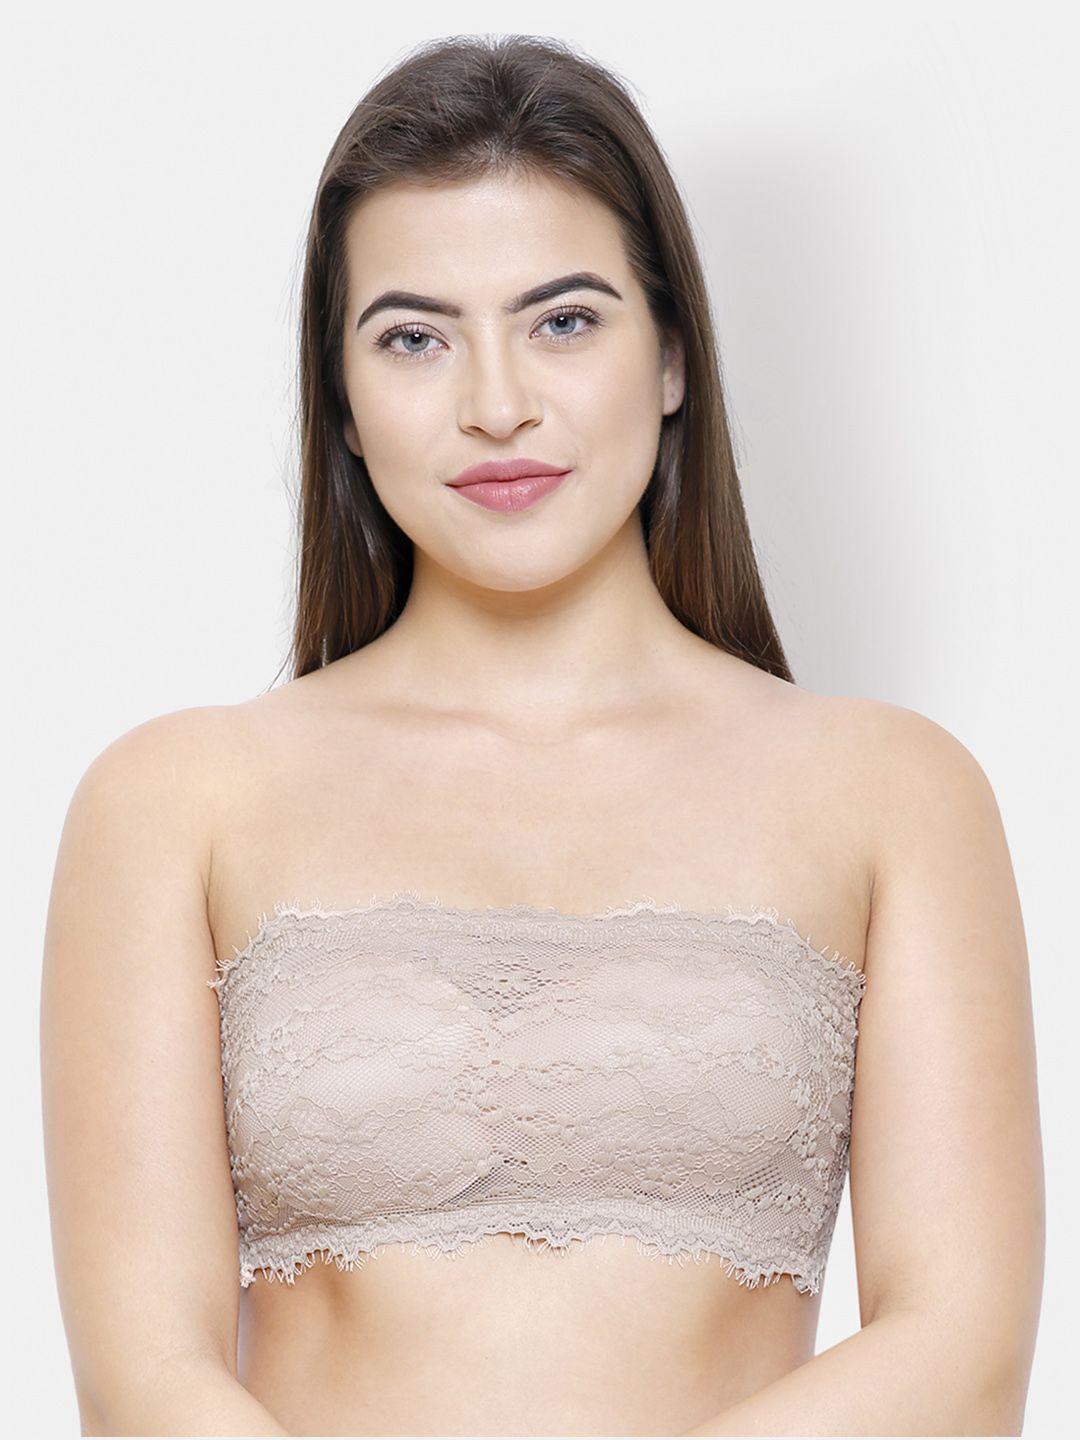 fashionrack beige lace non-wired lightly padded bandeau bra 8043